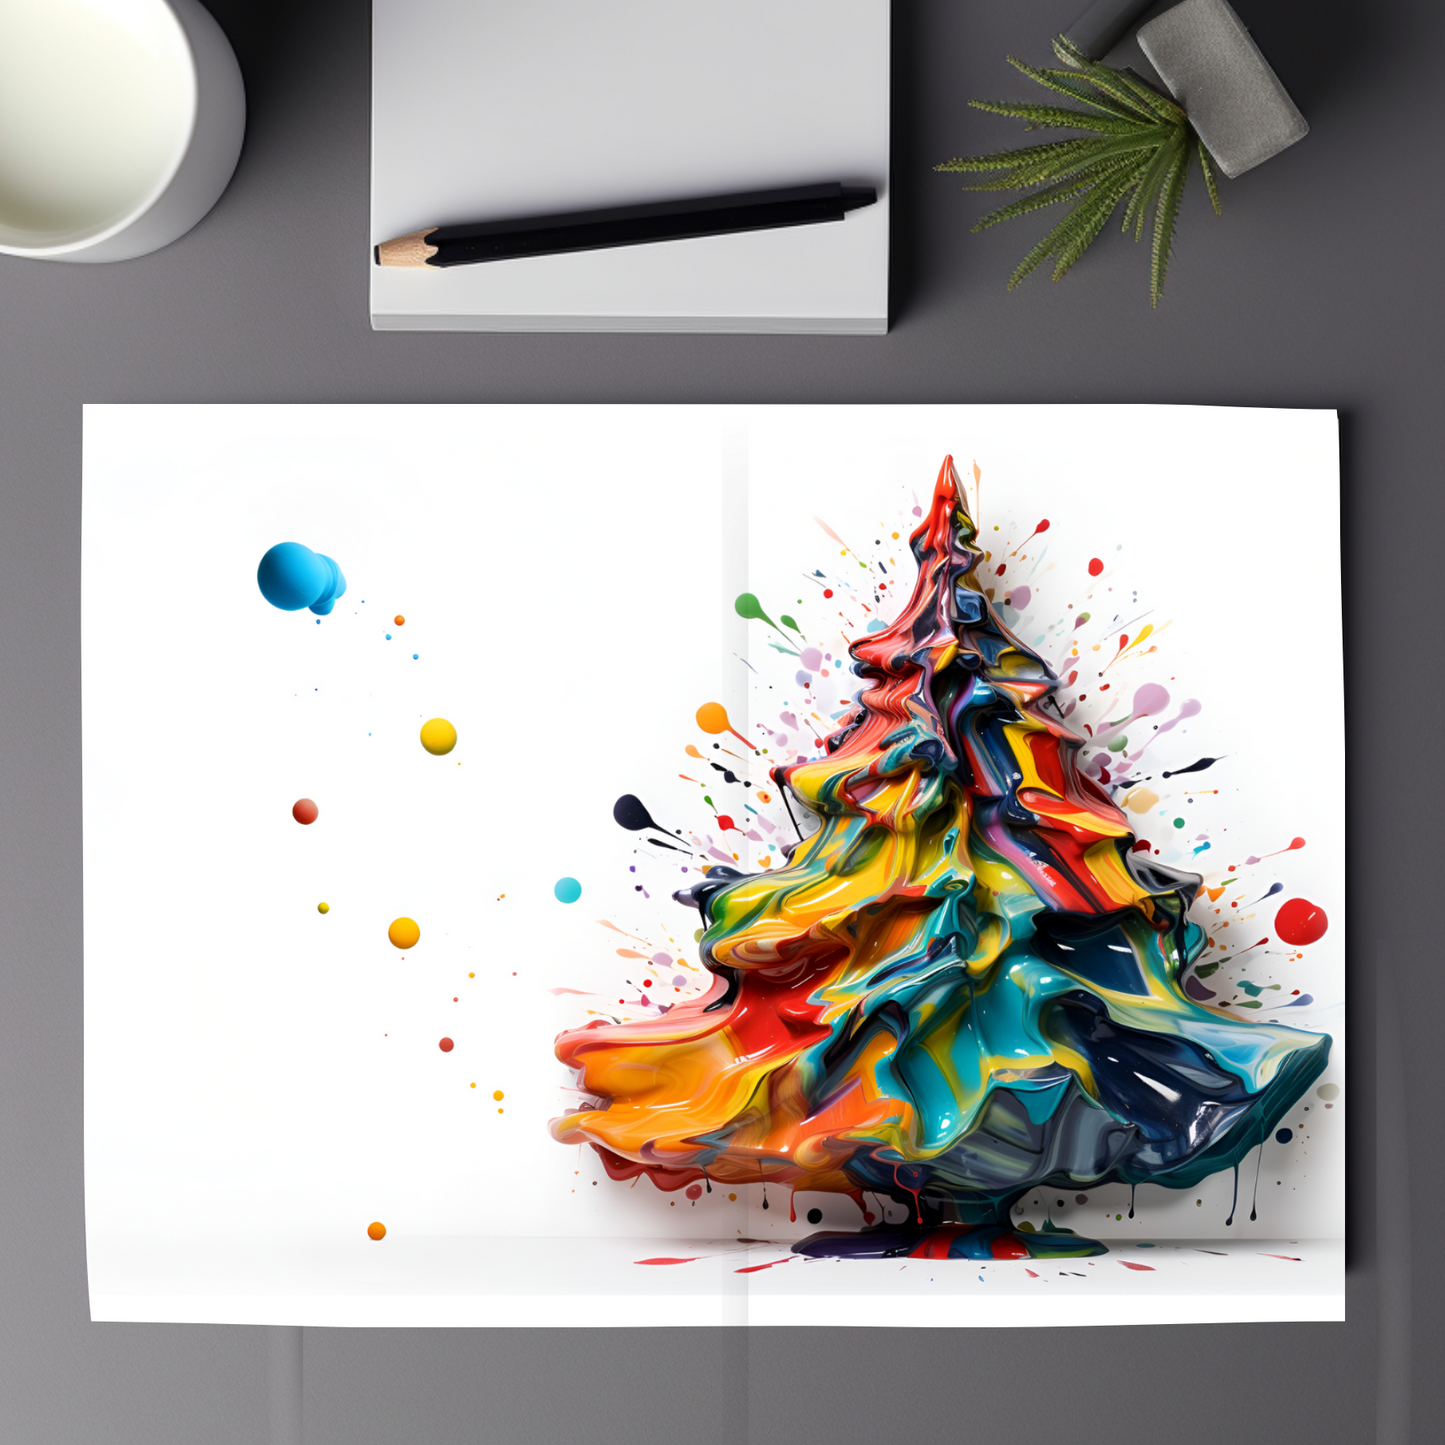 Encaustic Christmas Tree A7 5x7" Card - 5x7 inches | 130# Premium Weight & White Envelope